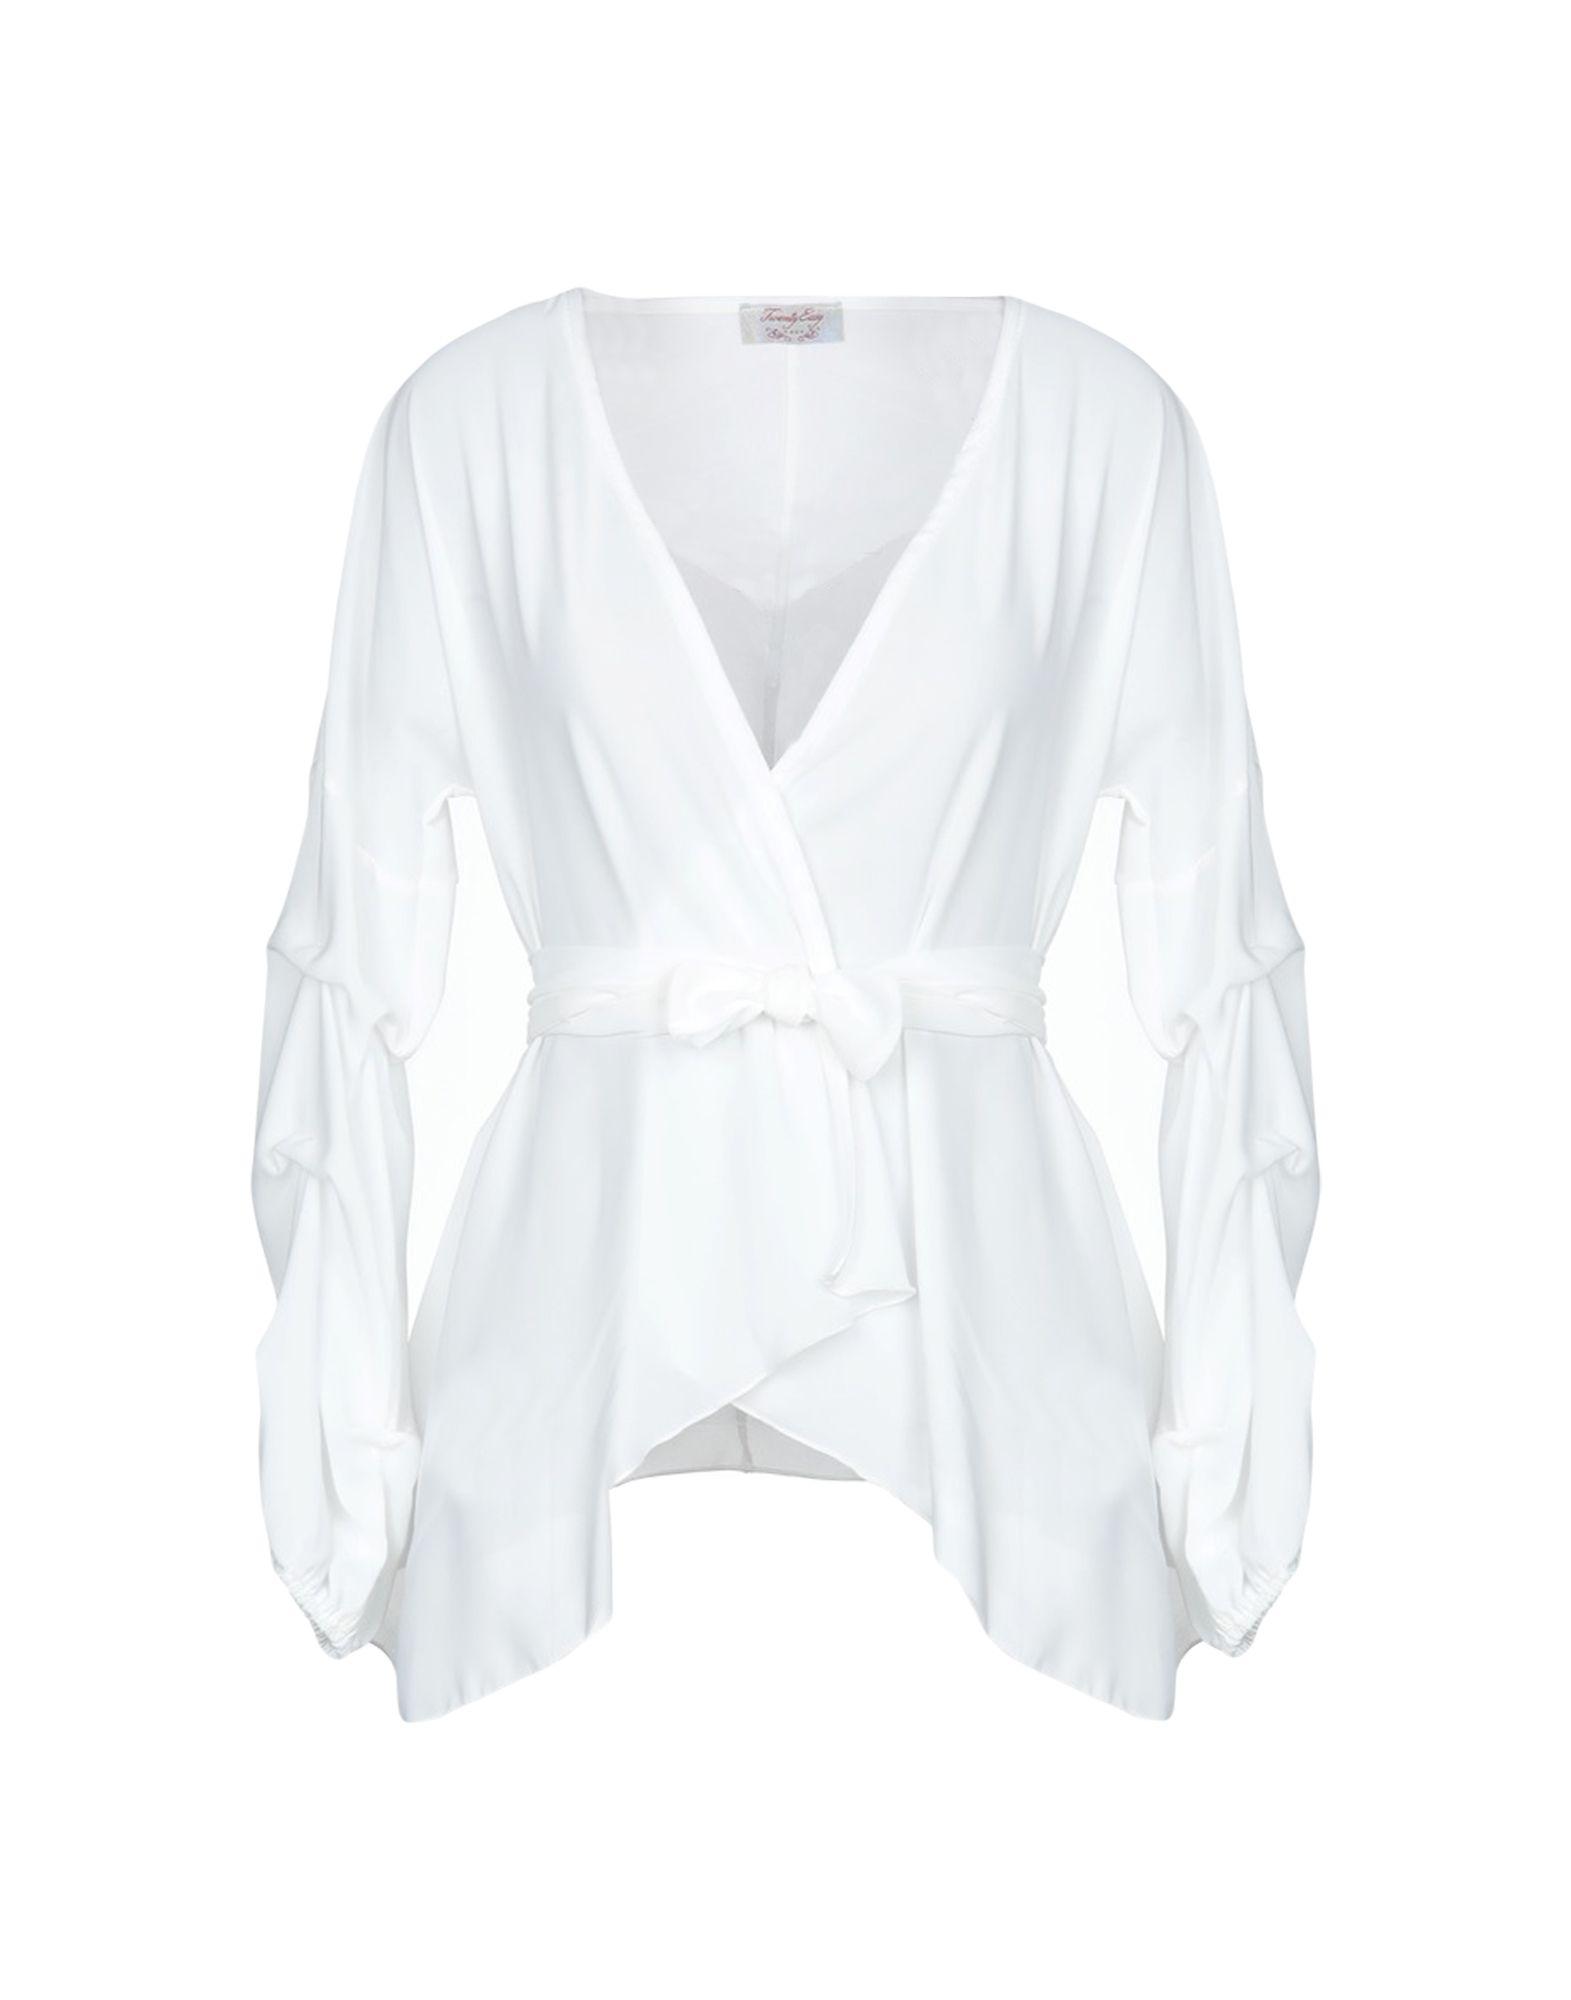 Twenty Easy By Kaos Synthetic Shirt in White - Lyst